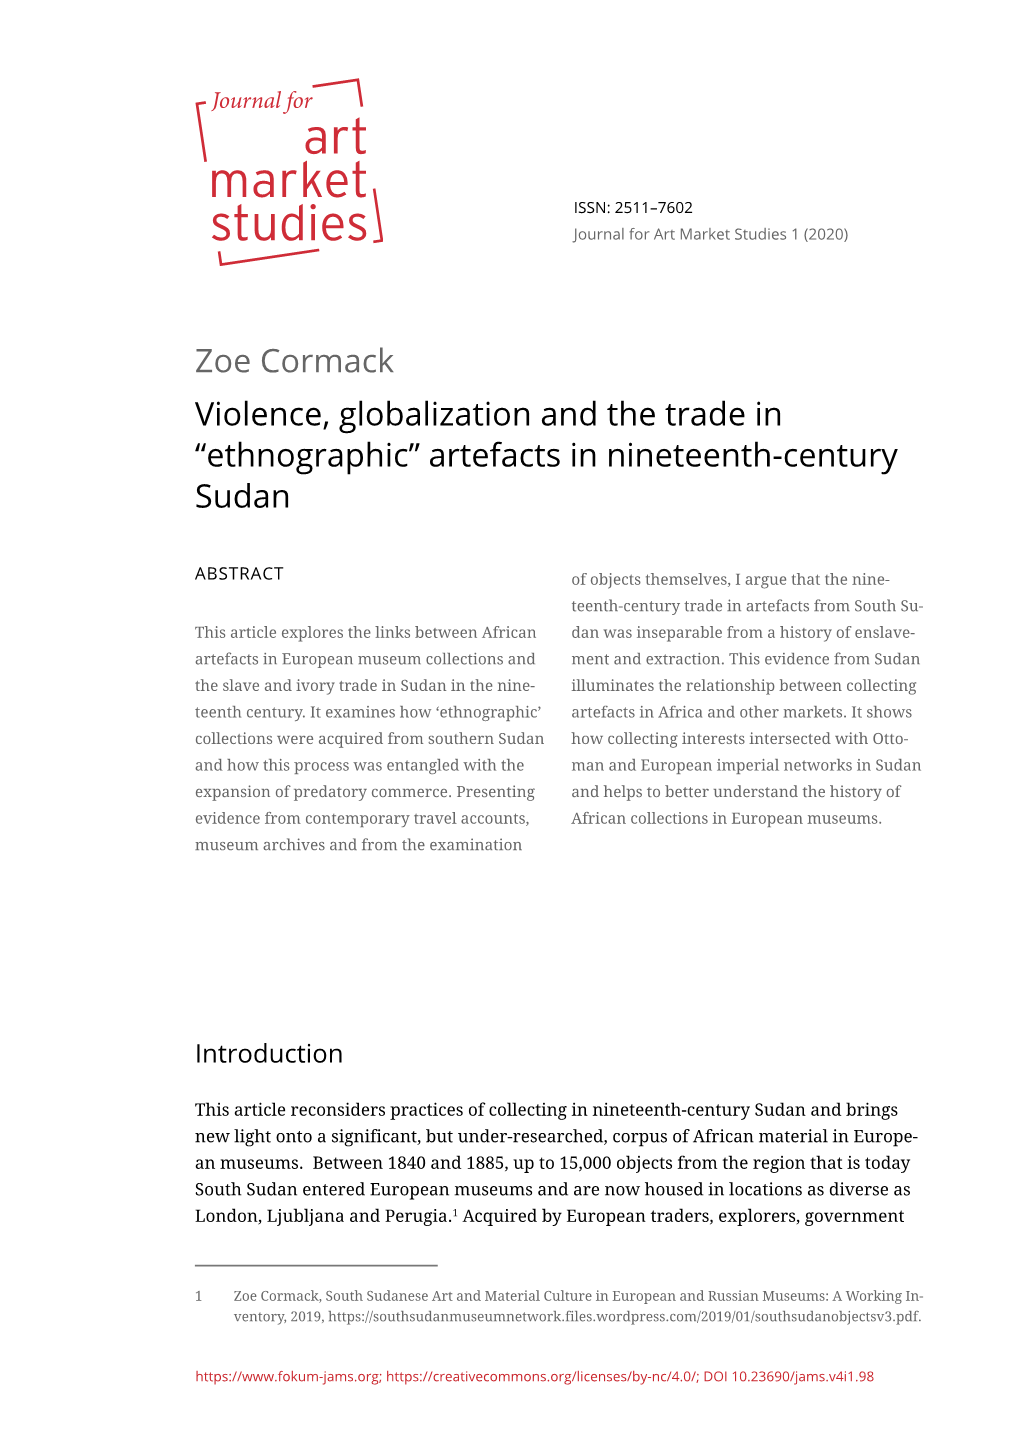 Zoe Cormack Violence, Globalization and the Trade in “Ethnographic” Artefacts in Nineteenth-Century Sudan